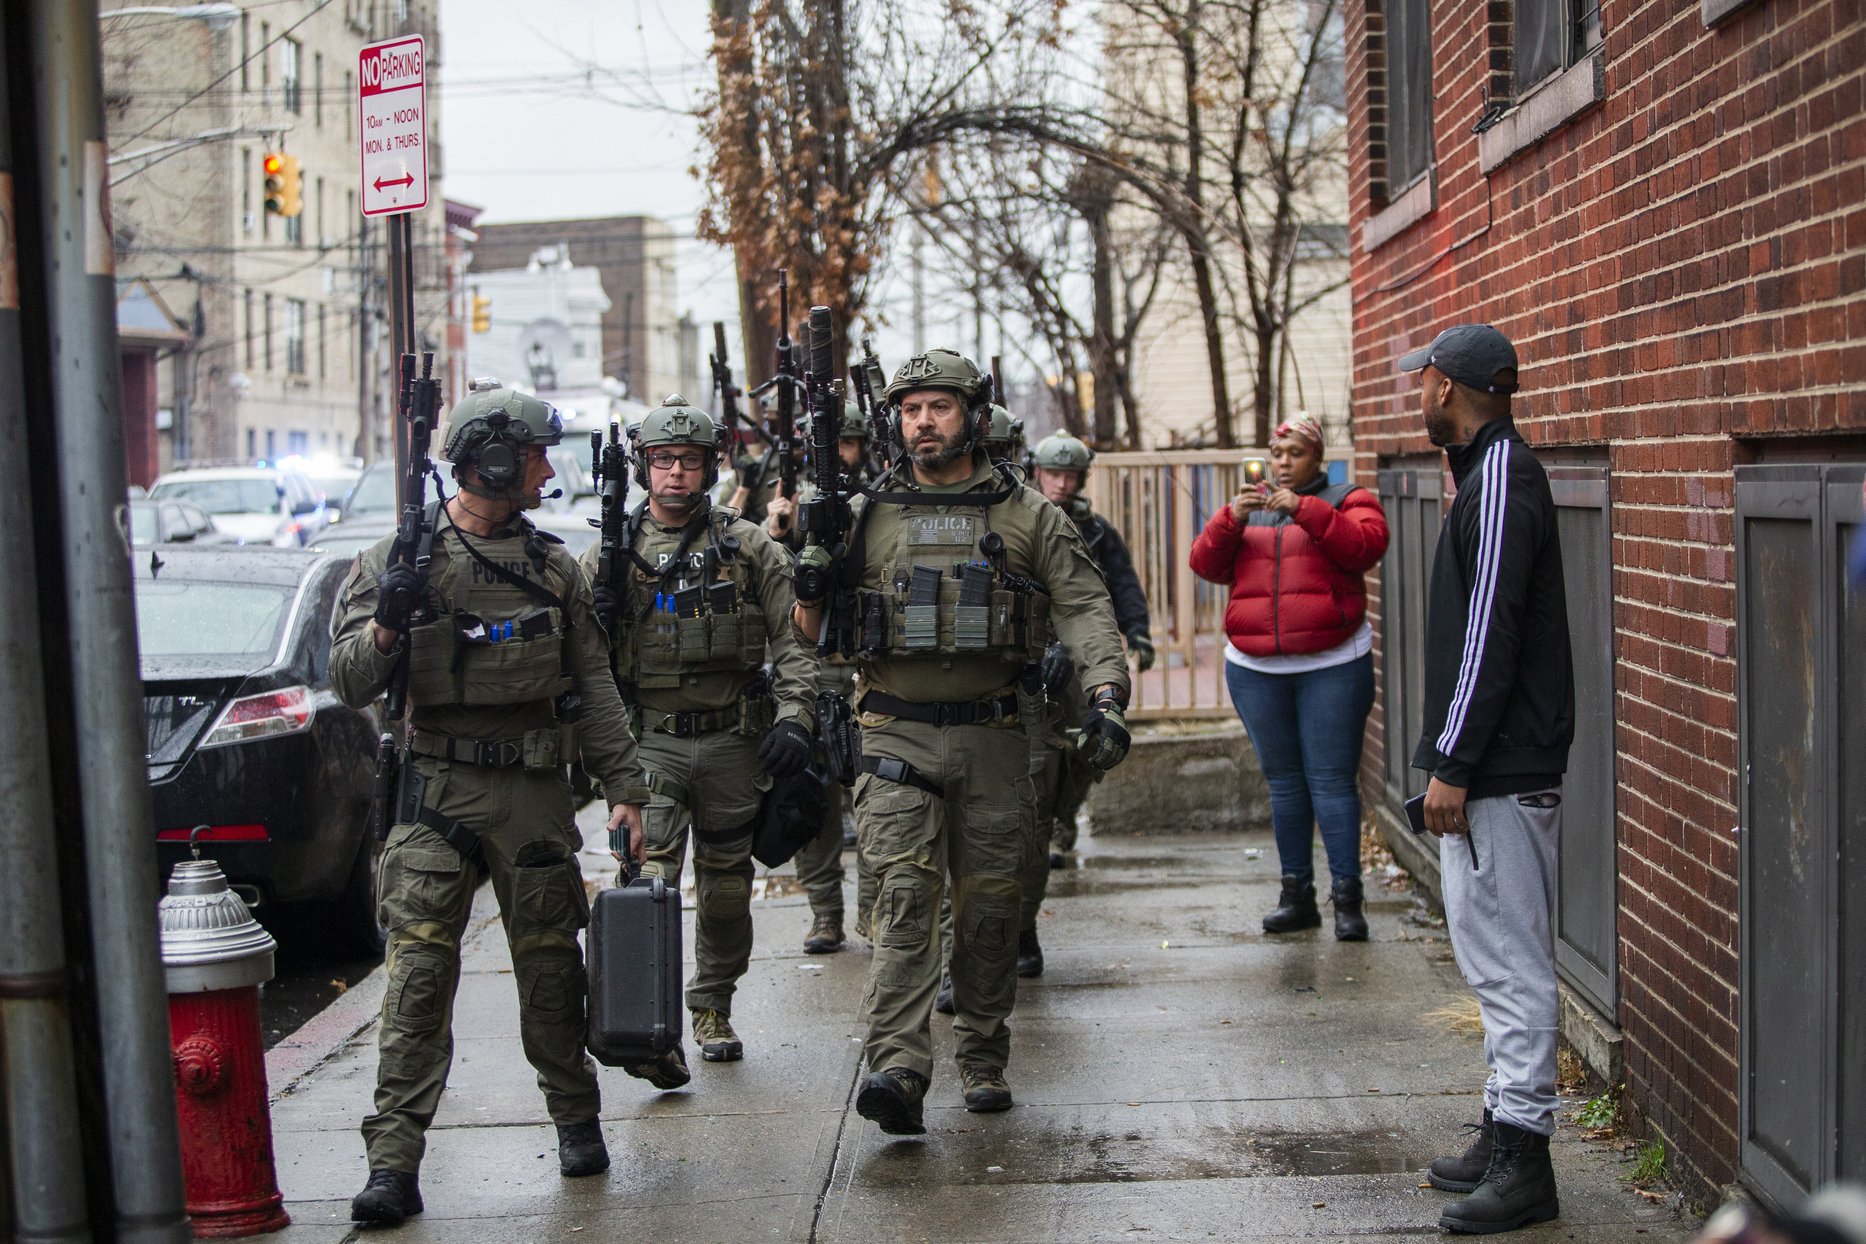 PHOTO: Police officers arrive at the scene following reports of gunfire, Tuesday, Dec. 10, 2019, in Jersey City, N.J.